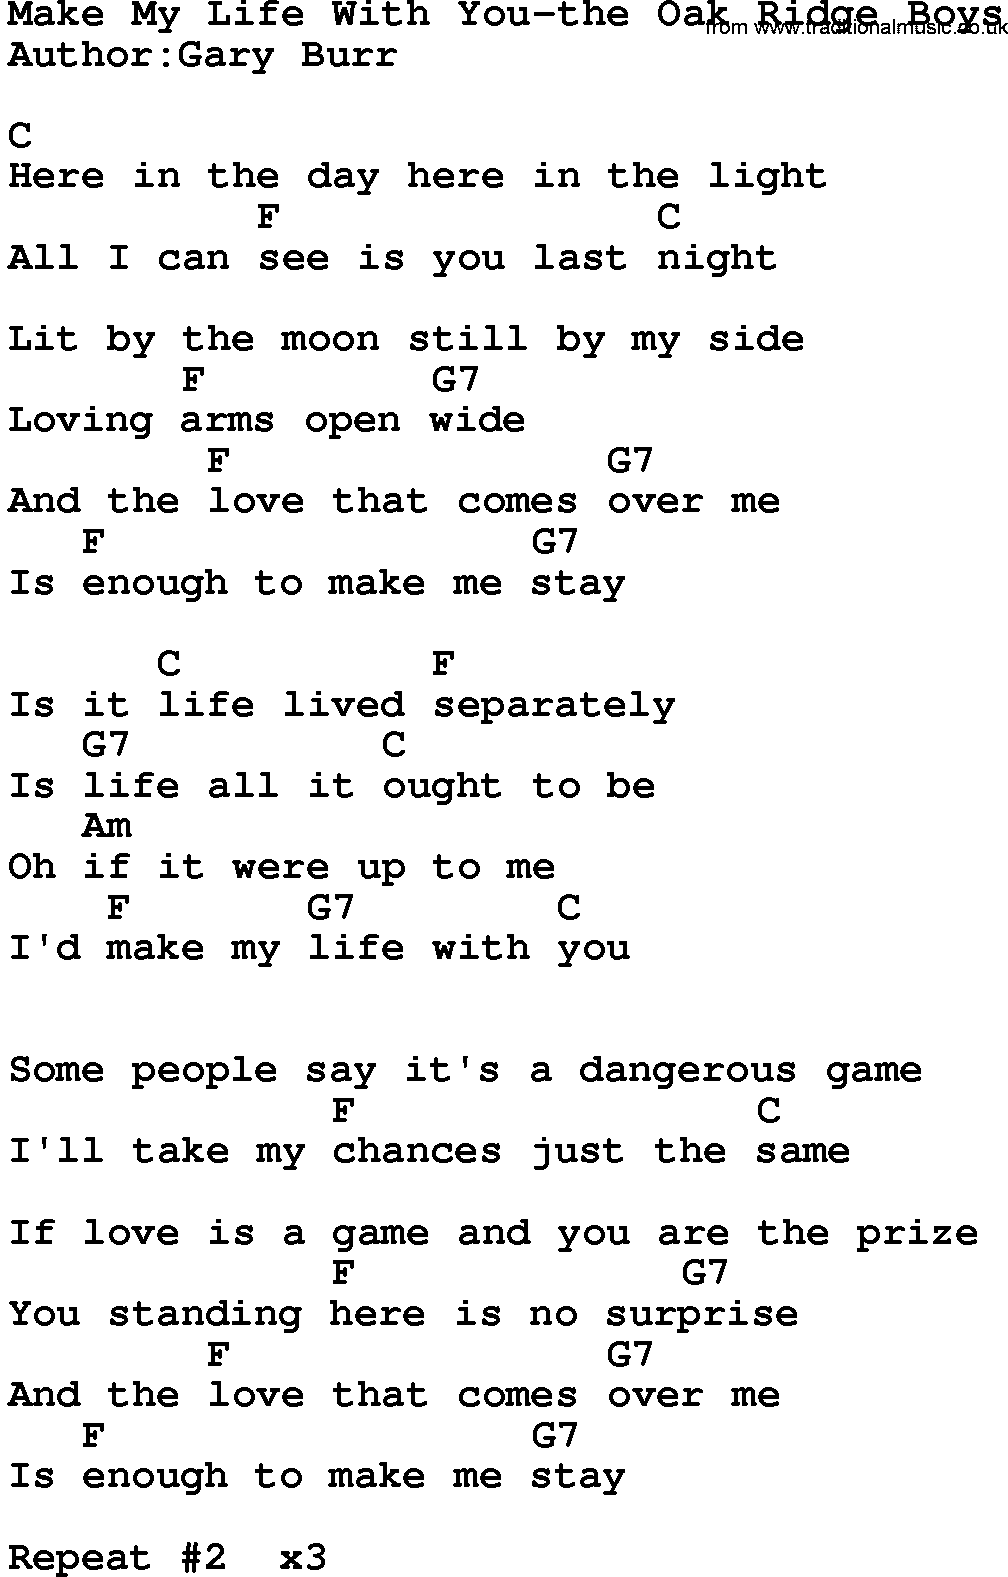 Country music song: Make My Life With You-The Oak Ridge Boys lyrics and chords